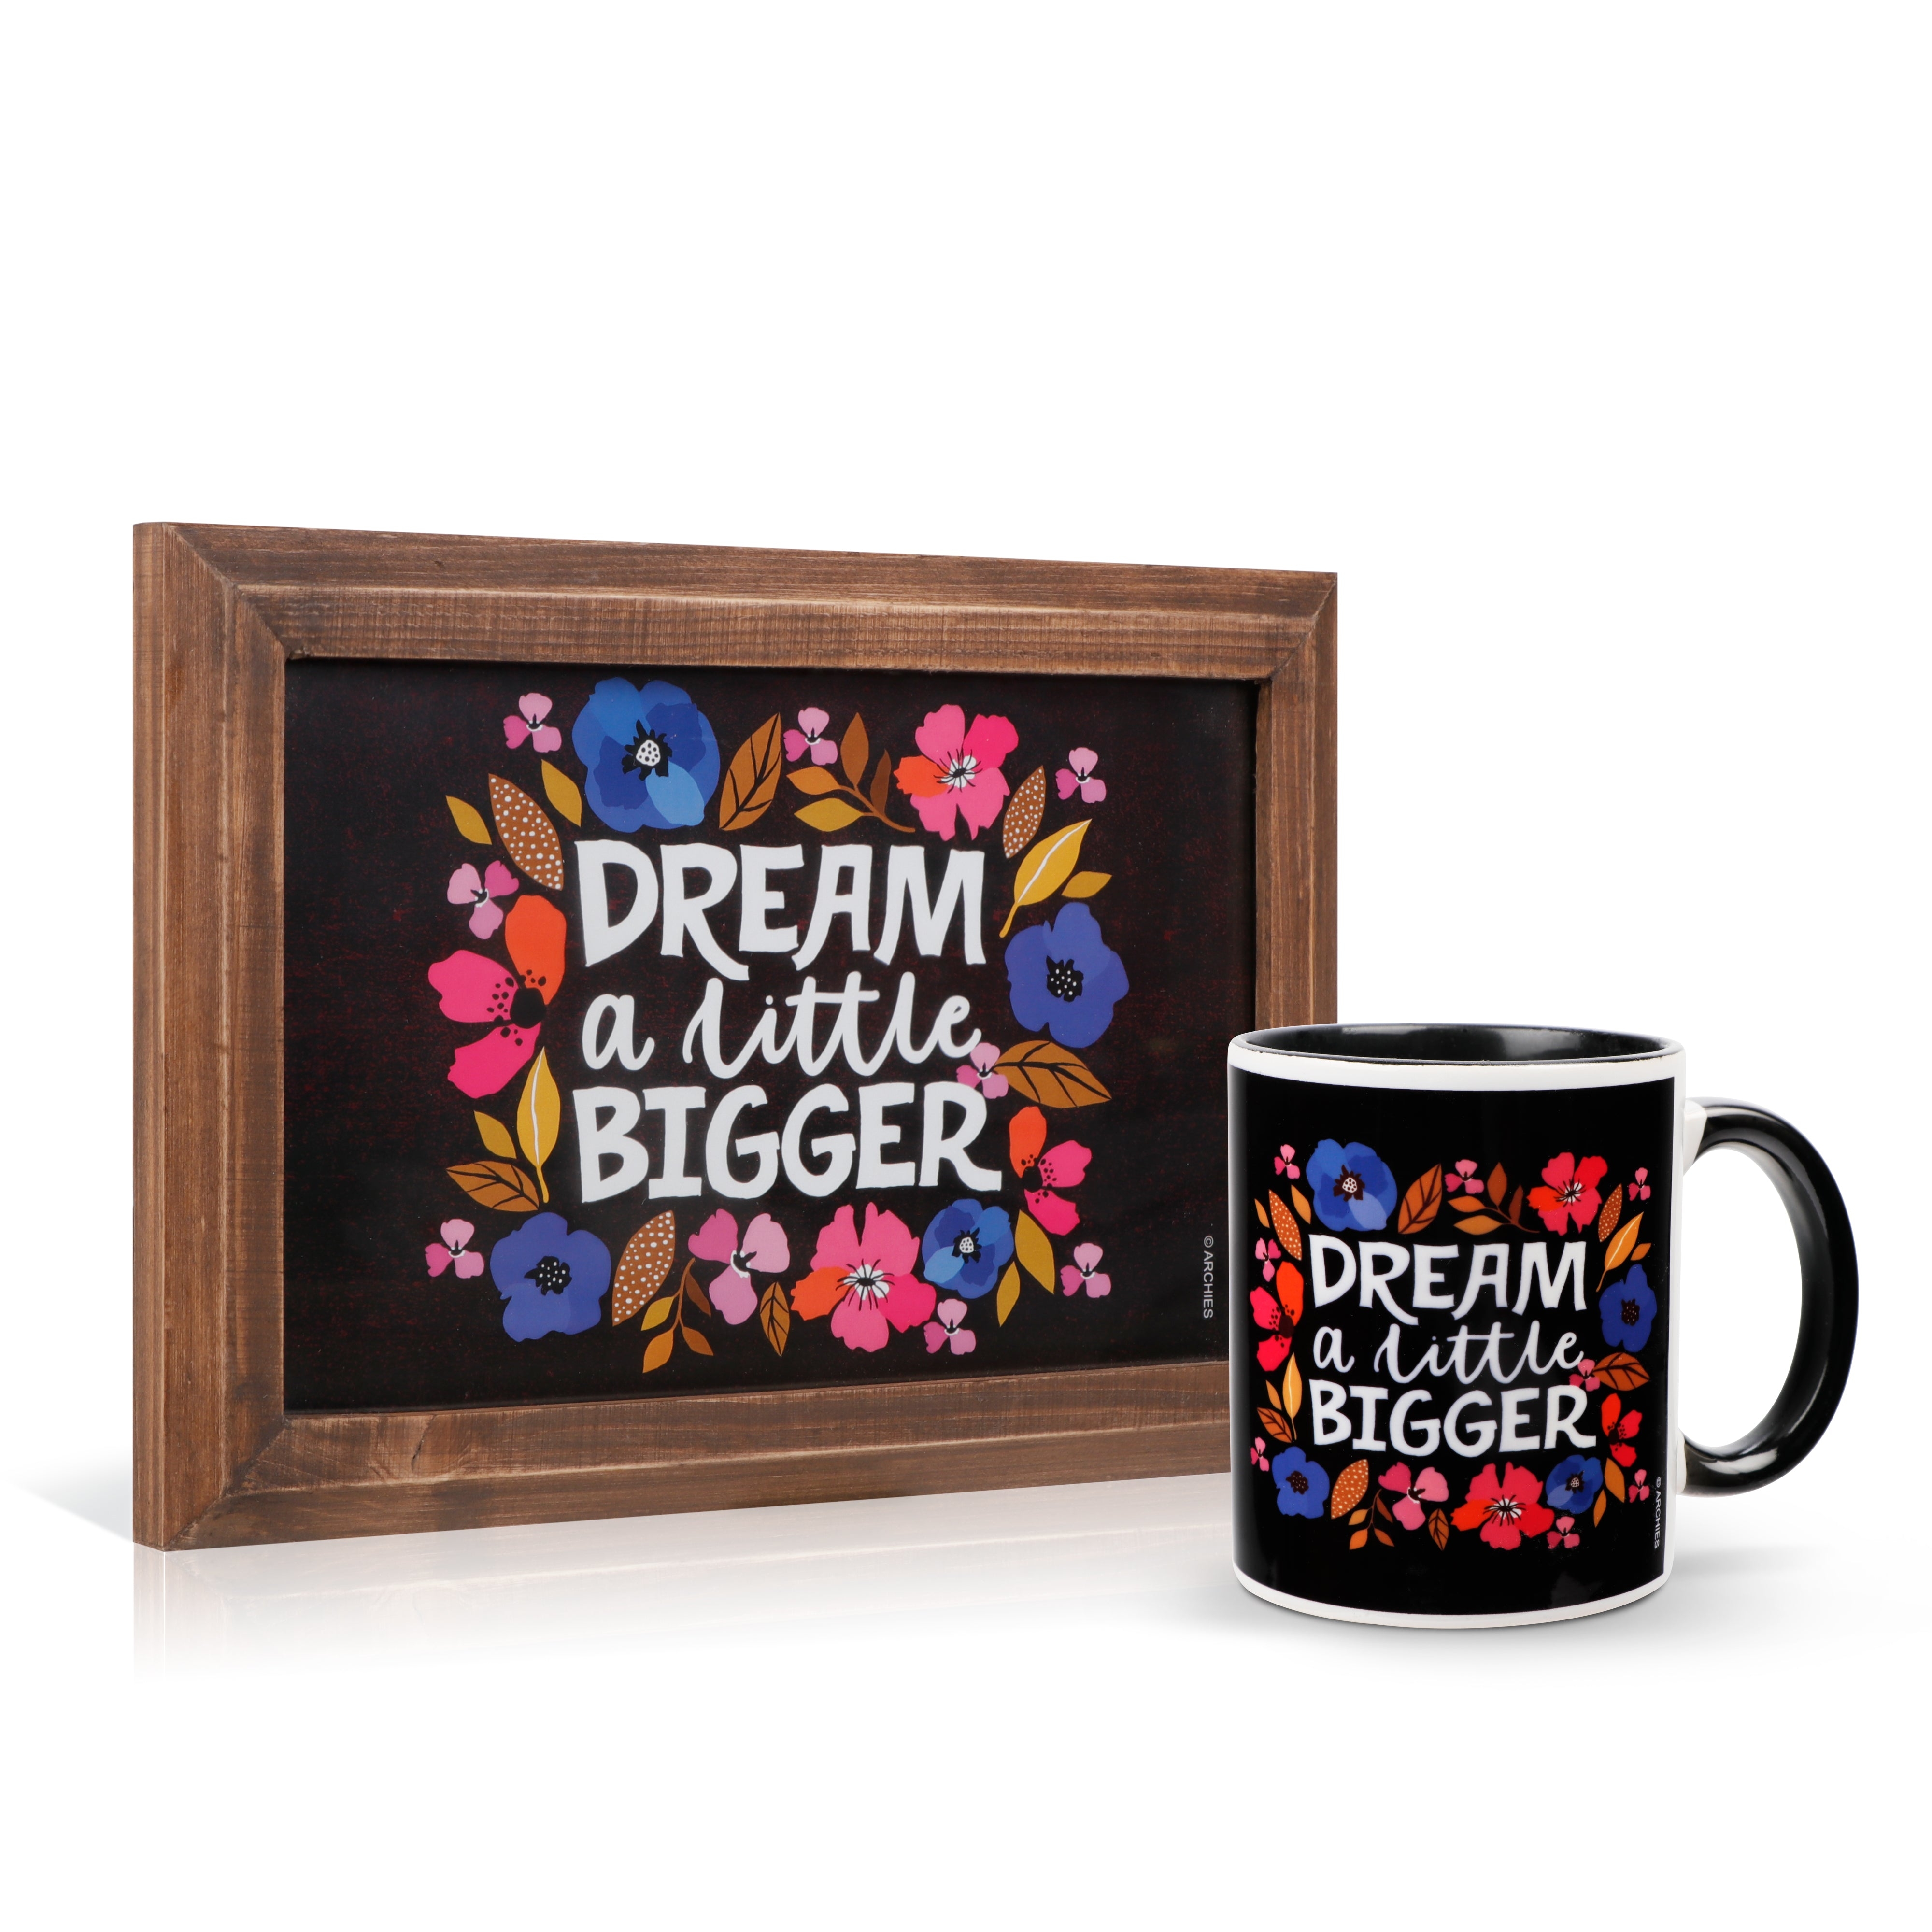 Archies KEEP SAKE Combo Gift with Ceramic Mug and Elevated Initial Quotatio- DREAM a little BIGGER